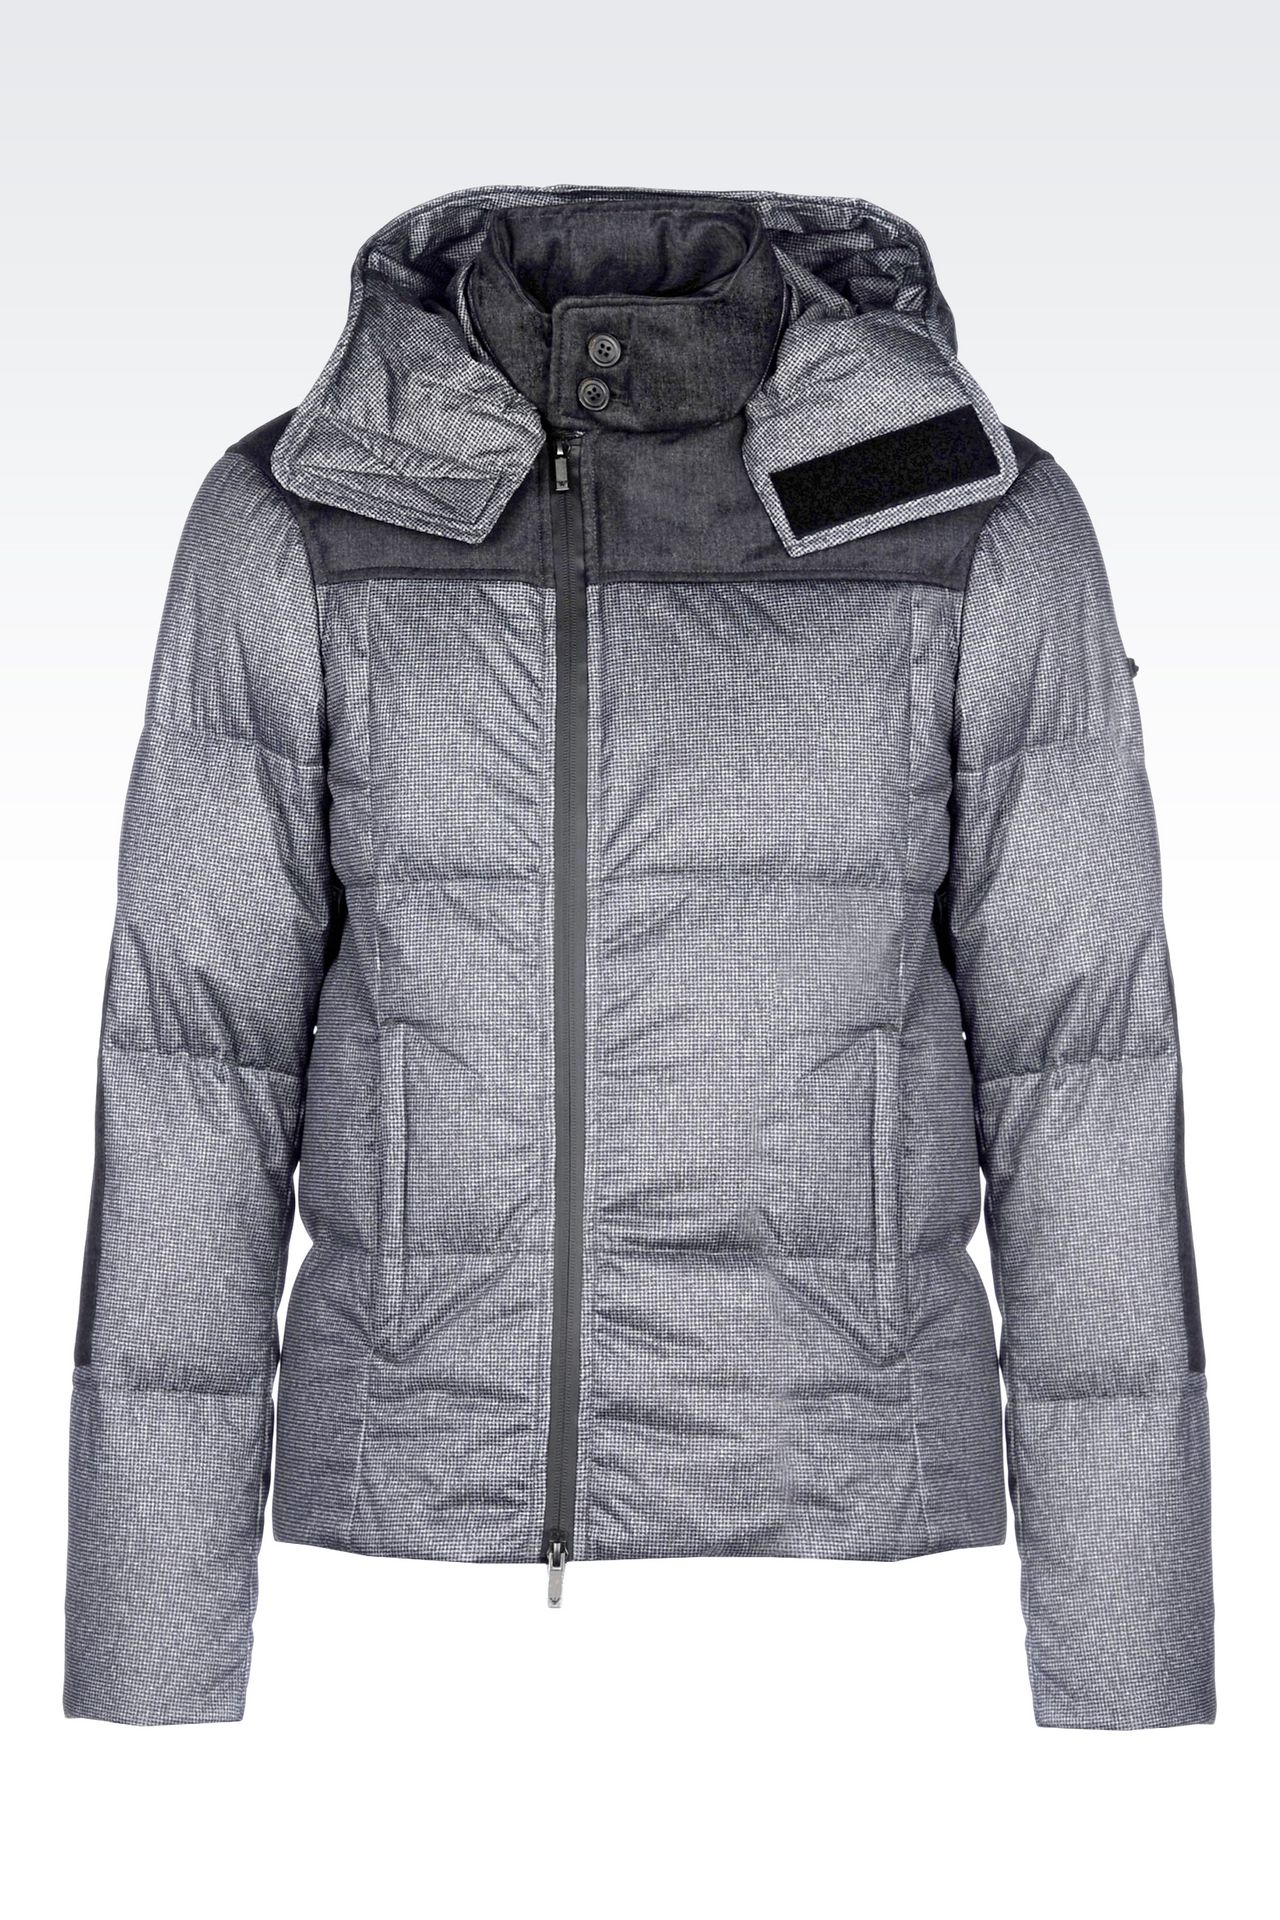 ... Armani Men QUILTED HOODED DOWN JACKET IN TECHNICAL JERSEY - Armani.com